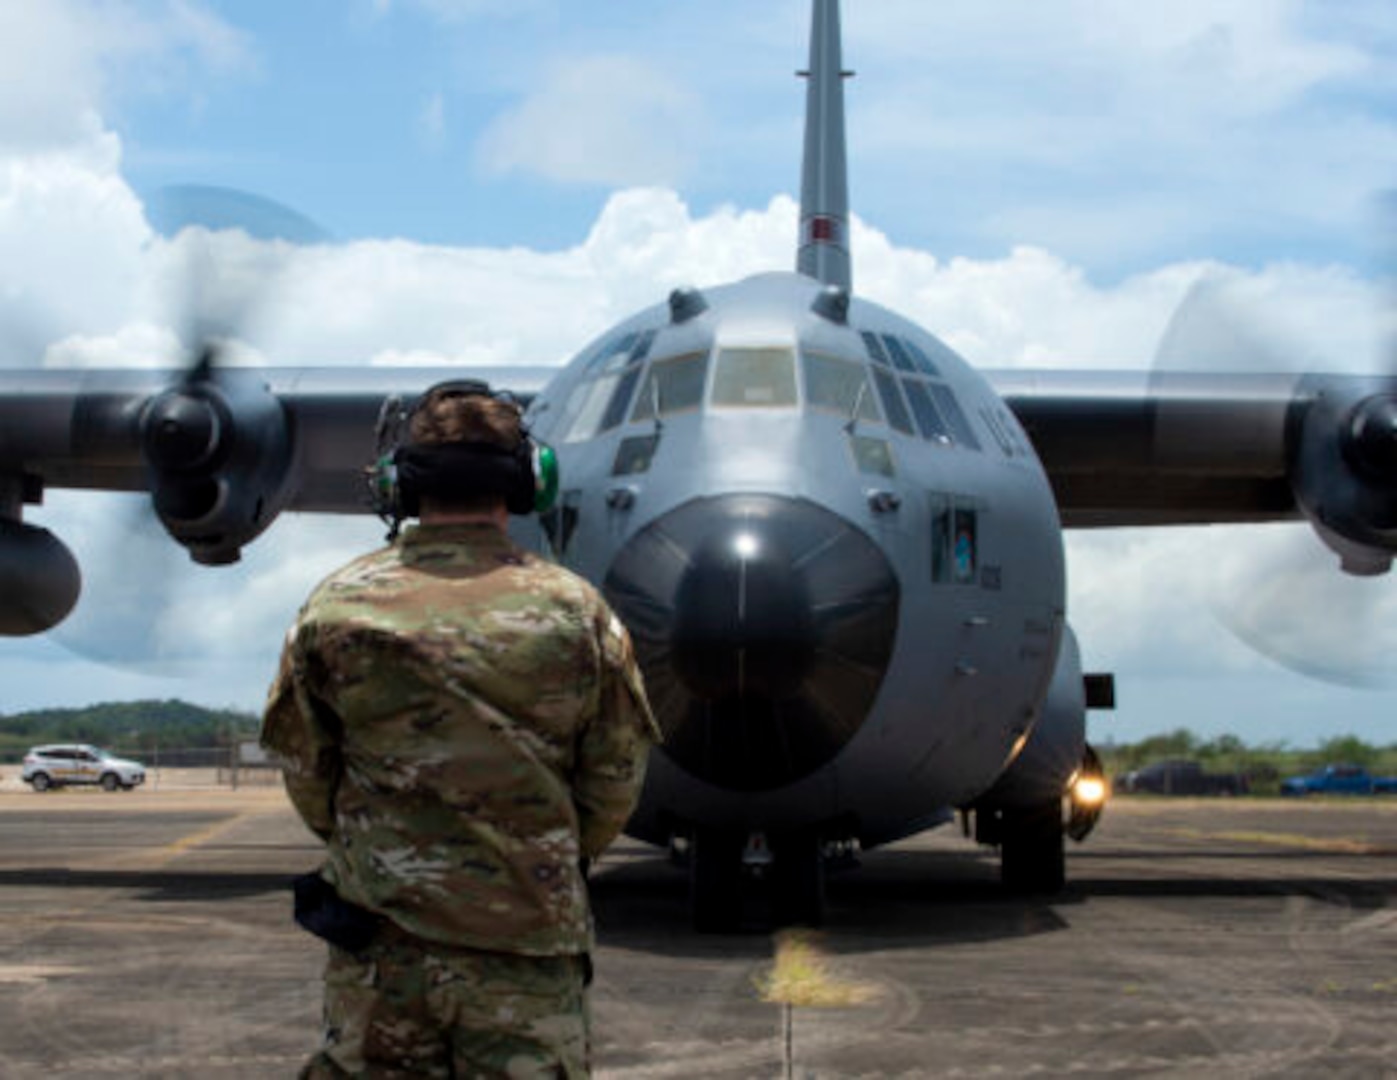 An Airman with the 123rd Contingency Response Group, Kentucky Air National Guard, waits to marshal a C-130 Hercules from the 133rd Airlift Wing in Aguadilla, Puerto Rico, Aug. 18, 2021. The Airman was part of a training exercise to respond to natural disasters and set up airbase operations.